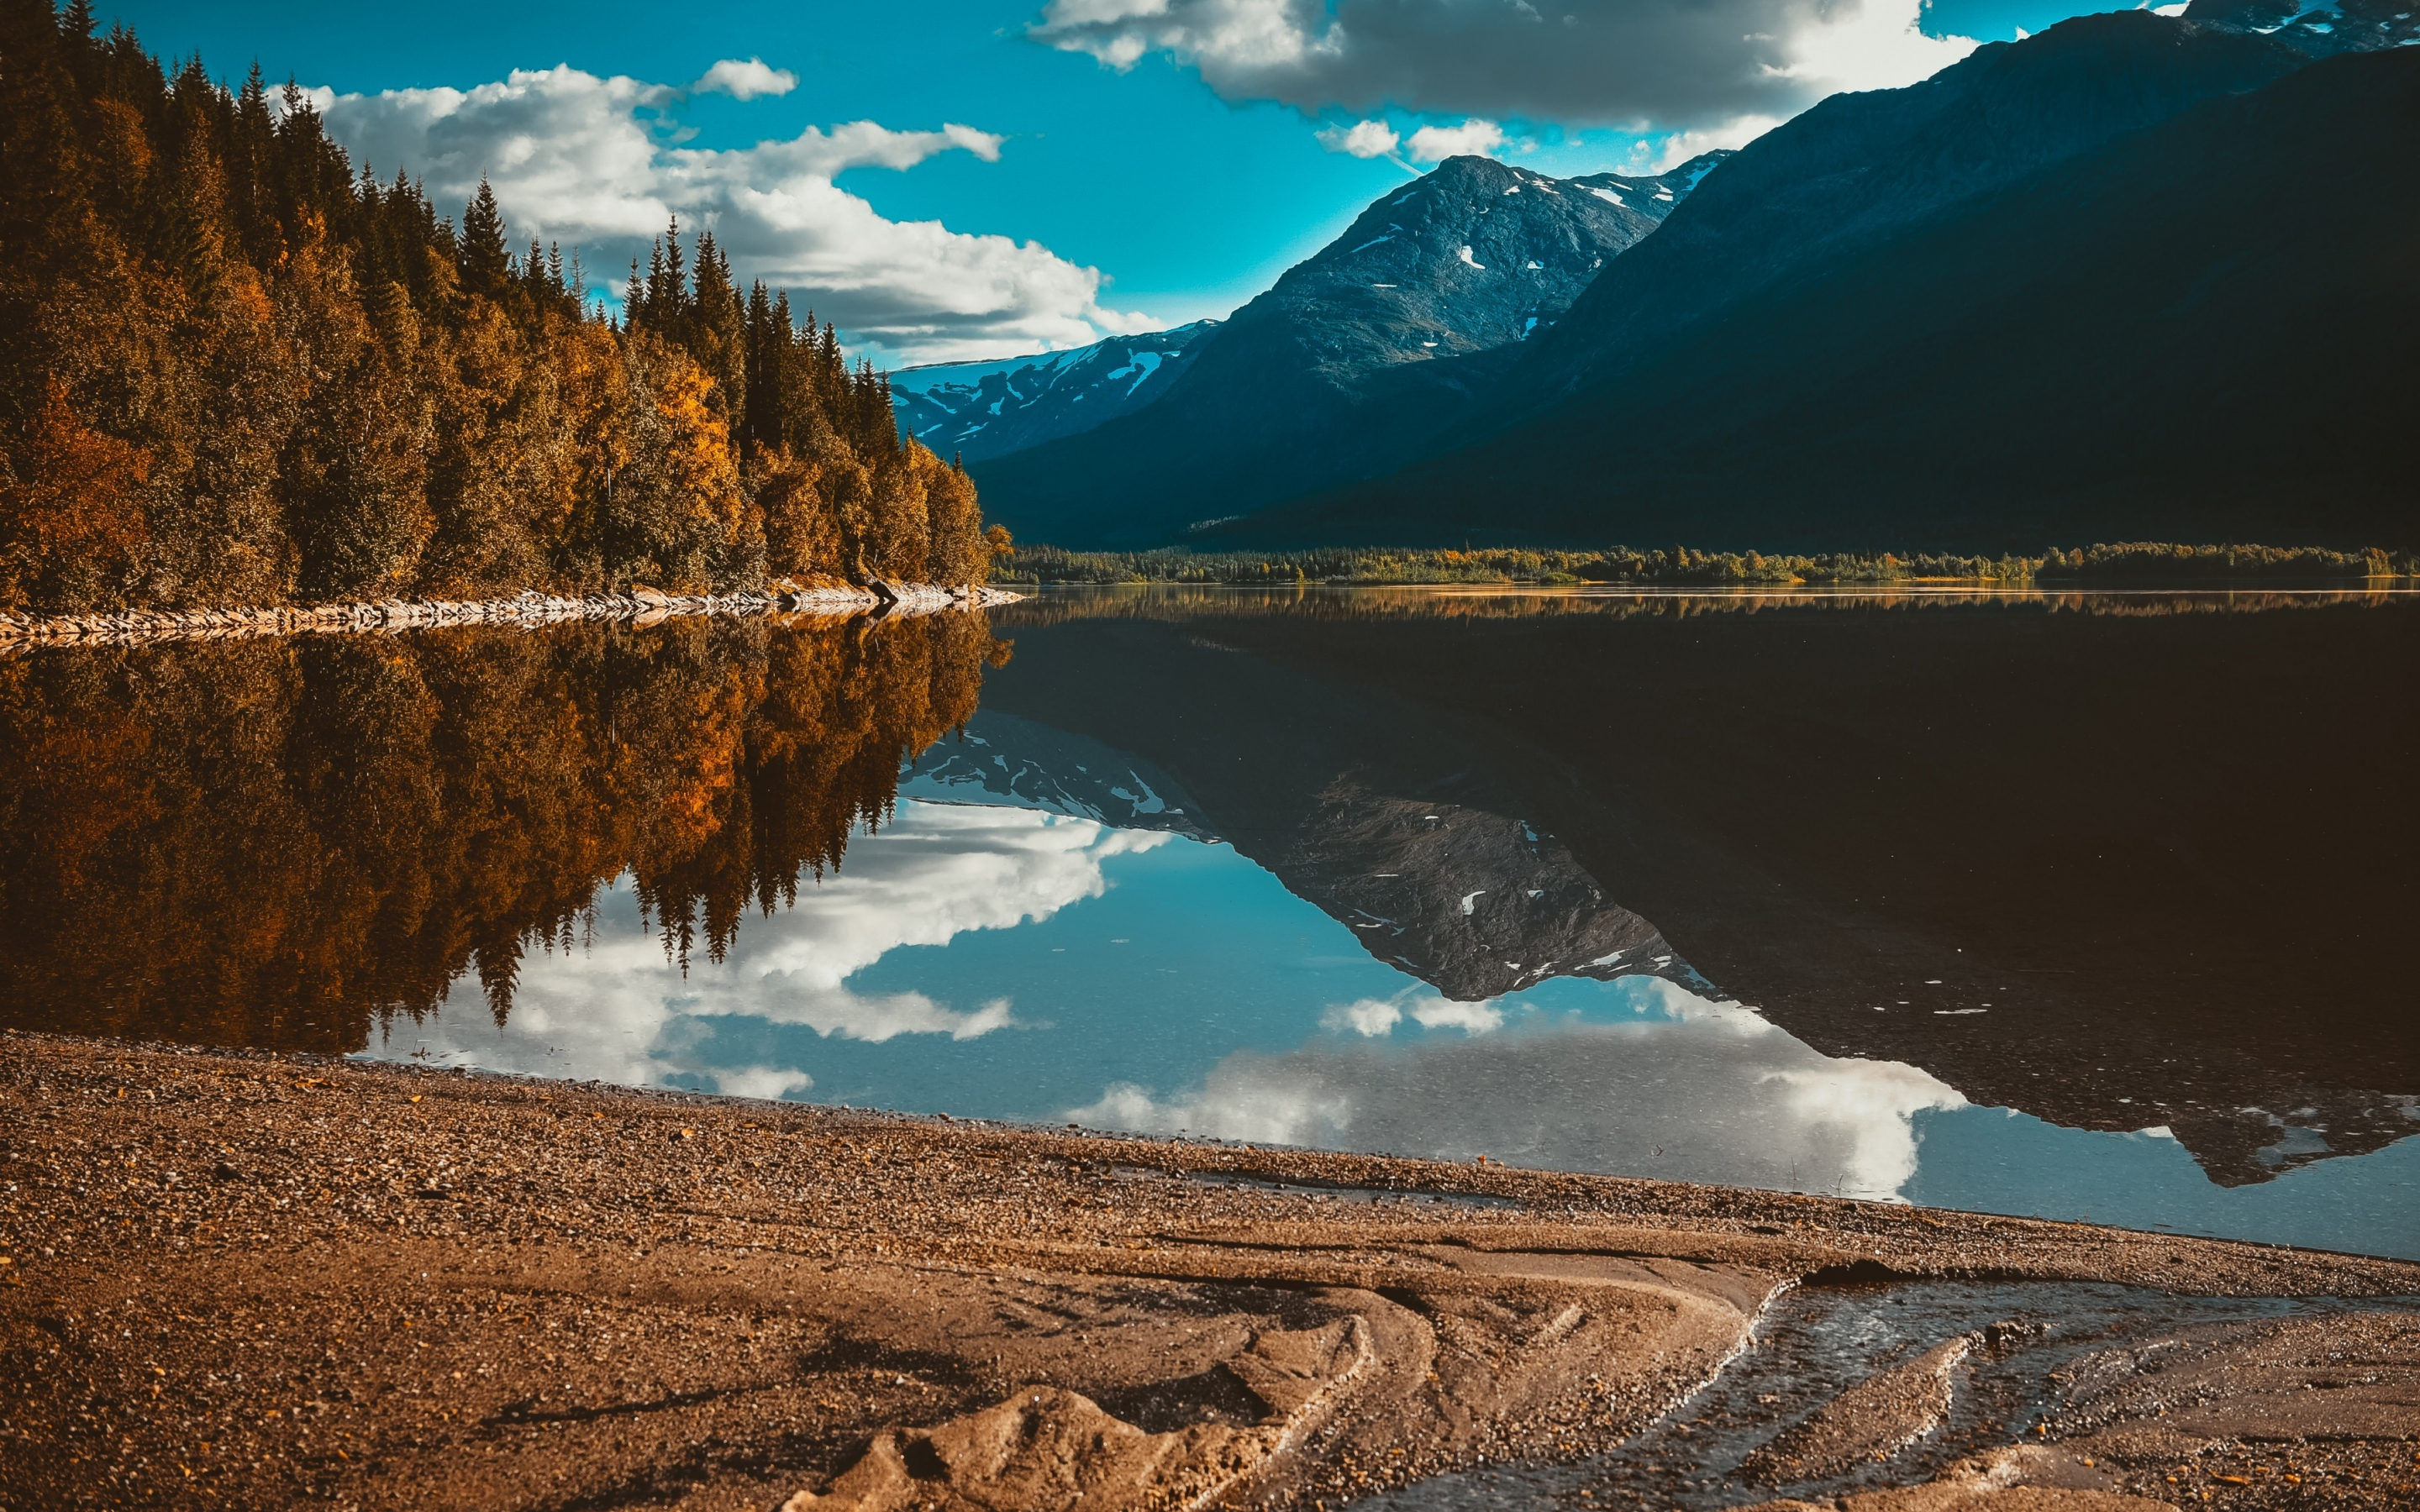 Lake, nature, trees, mountains, reflections, forest, 2880x1800 wallpaper